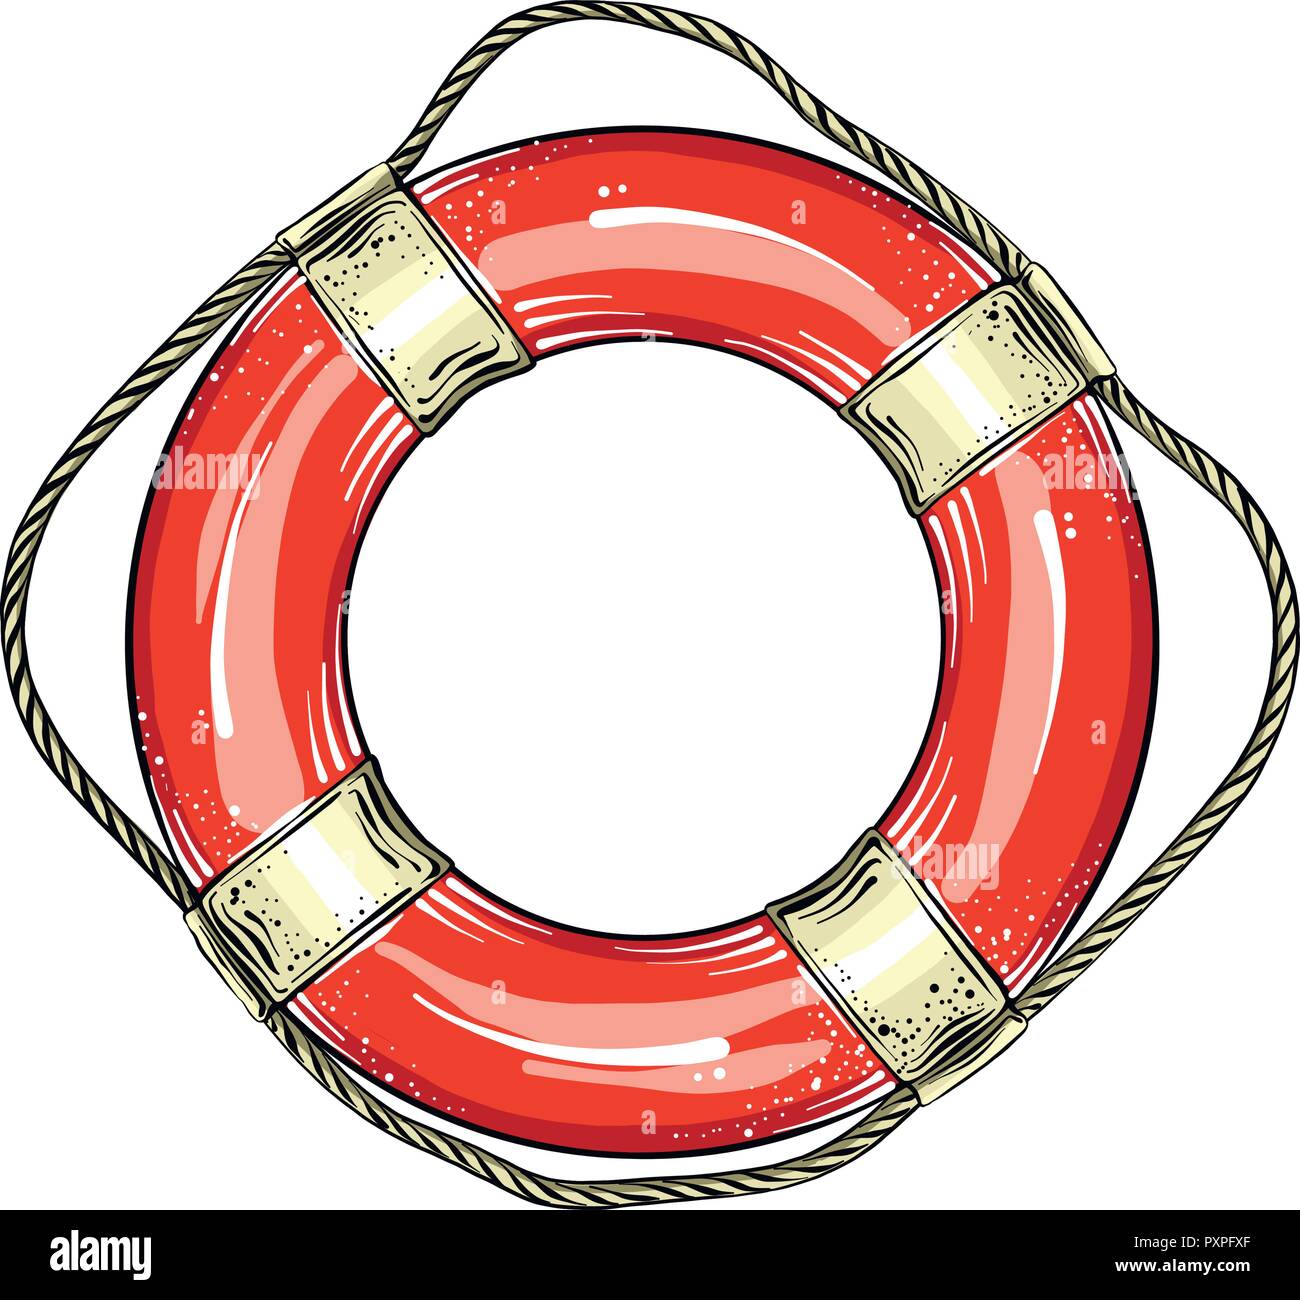 Hand drawn sketch of lifebuoy in red and white color, isolated on white background. Detailed vintage style drawing. Vector illustration Stock Vector